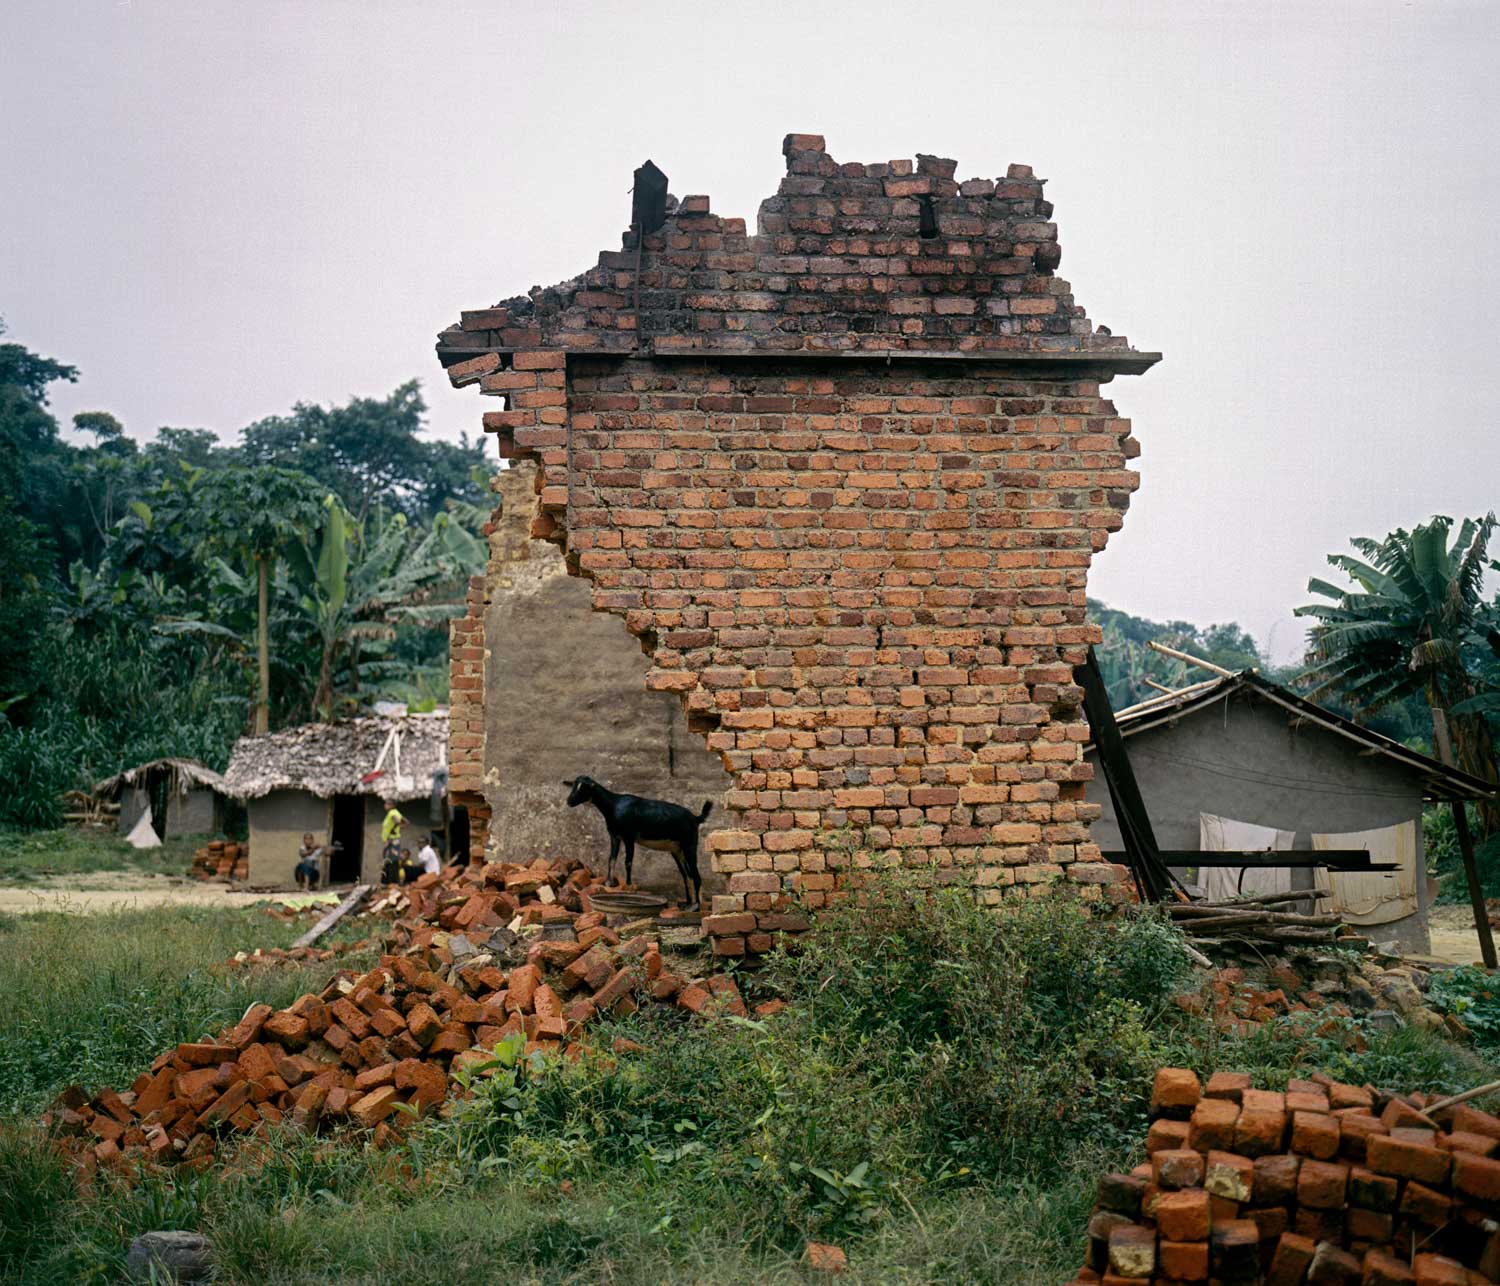  Decaying Belgian colonial era structures speak to the area’s history of mining, and to Congo’s struggles with outsiders who vied for its riches. Lulingu was a central site for Belgian colonial mining operations until the 1960s. After independence, t